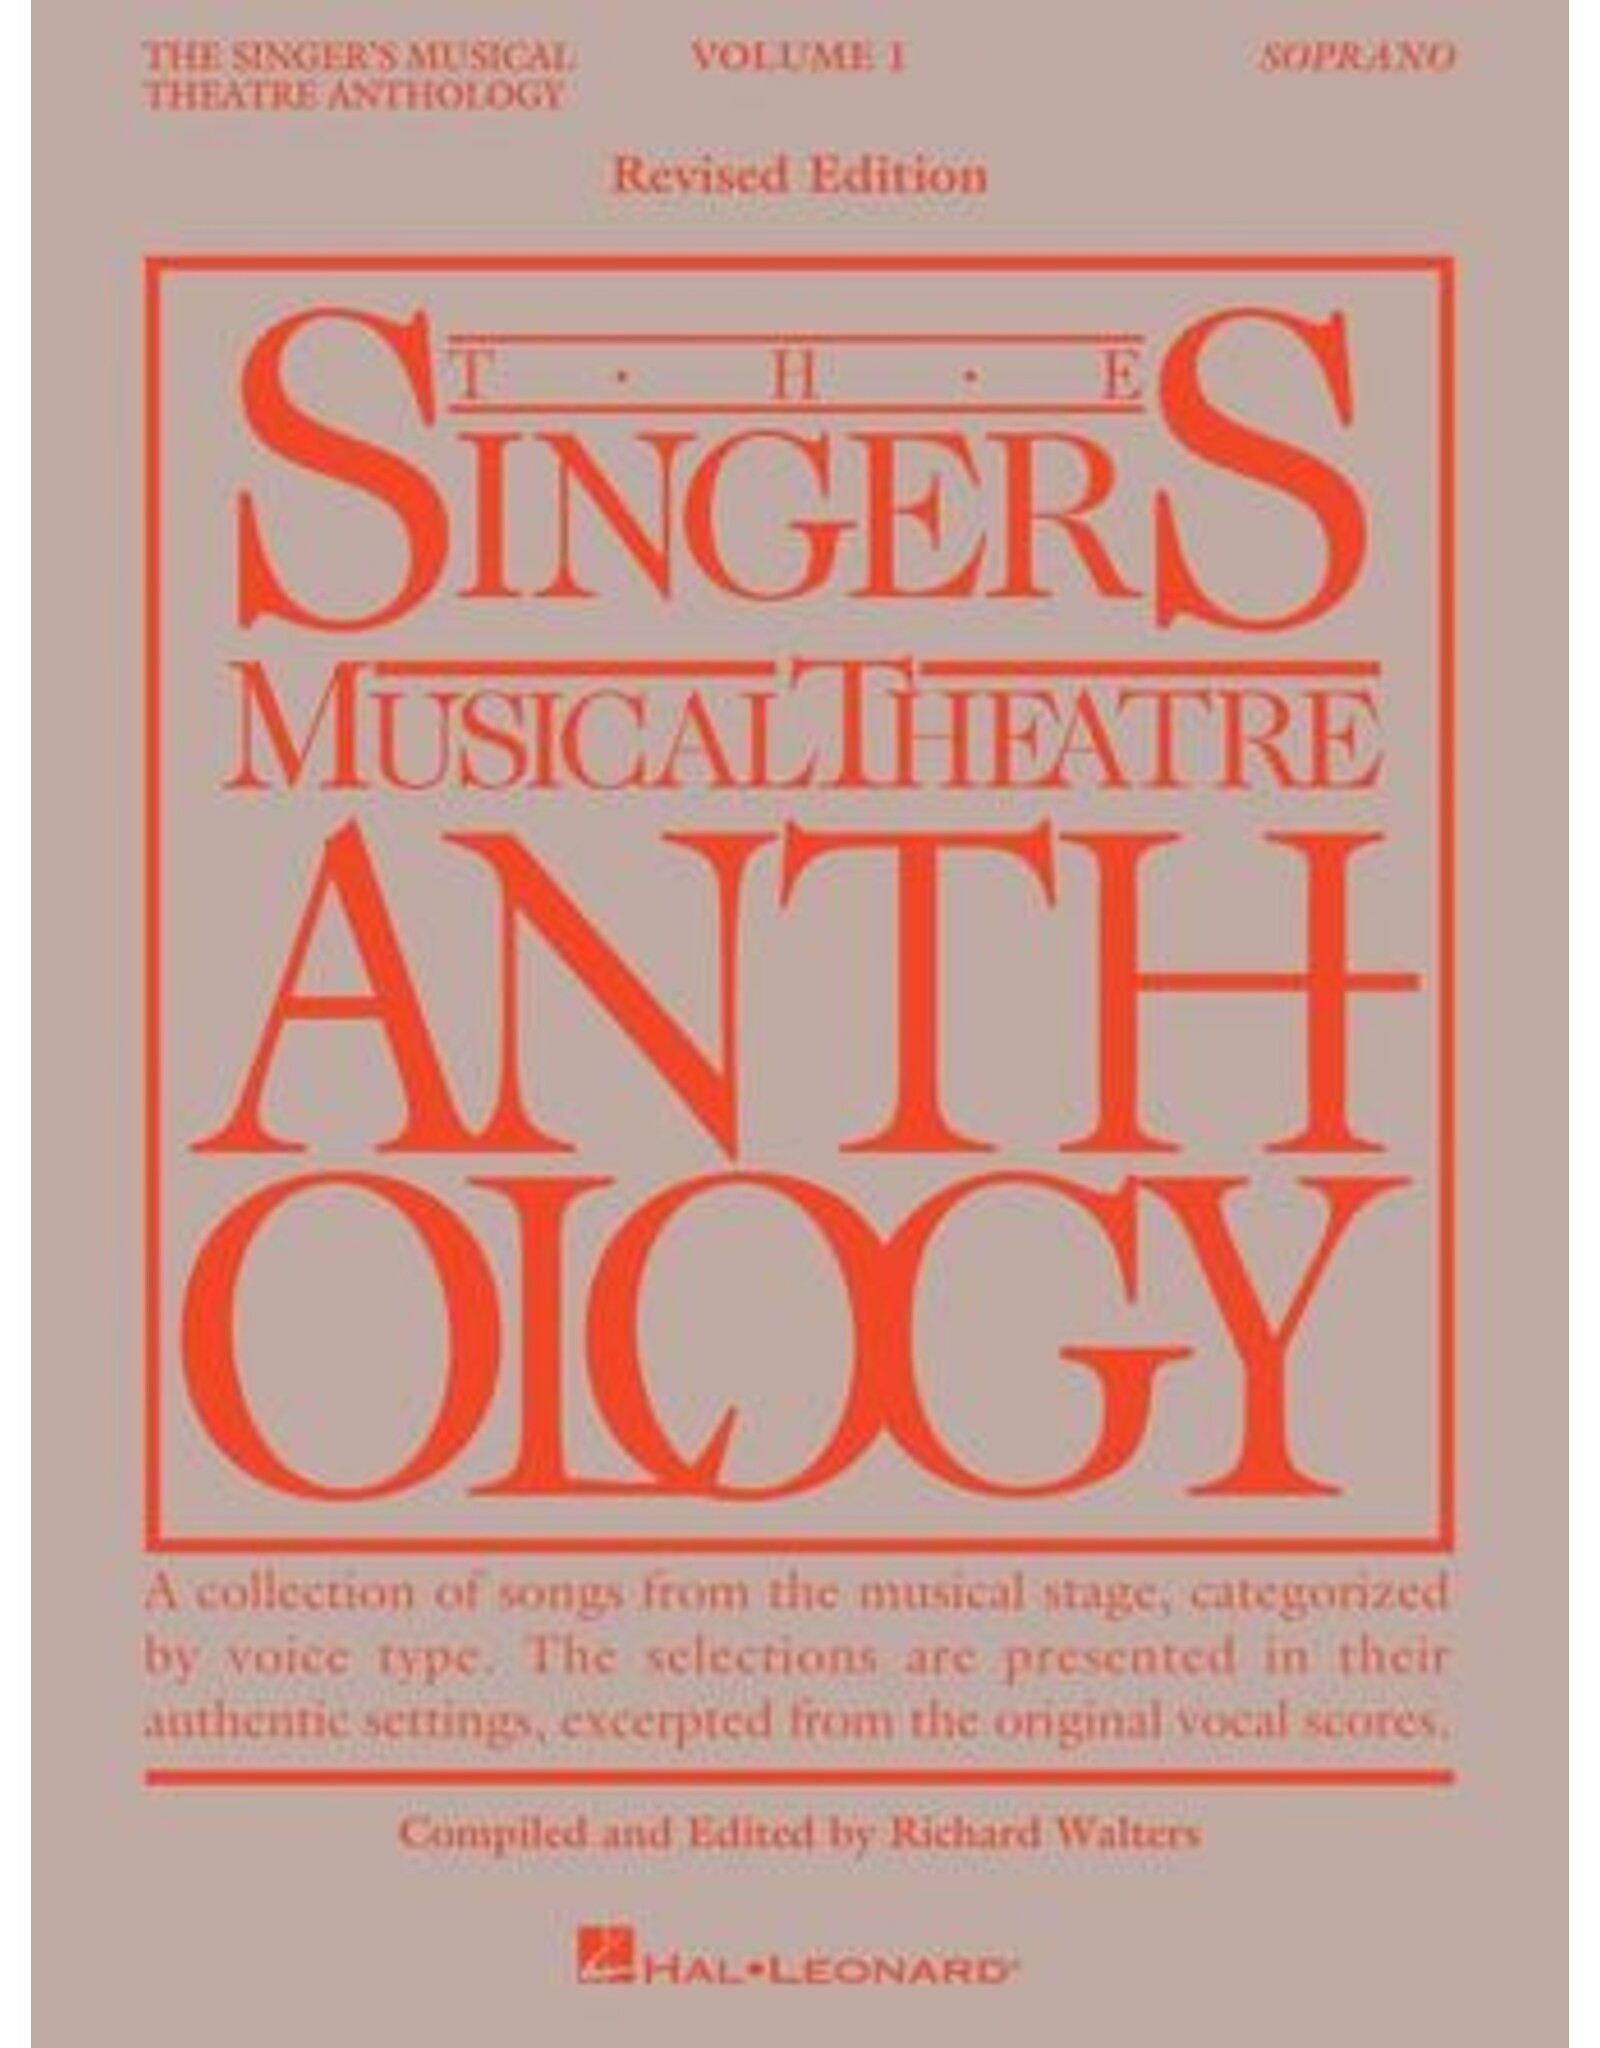 Hal Leonard The Singer's Musical Theatre Anthology Volume 1 Soprano Book Only Softcover compiled and edited by Richard Walters